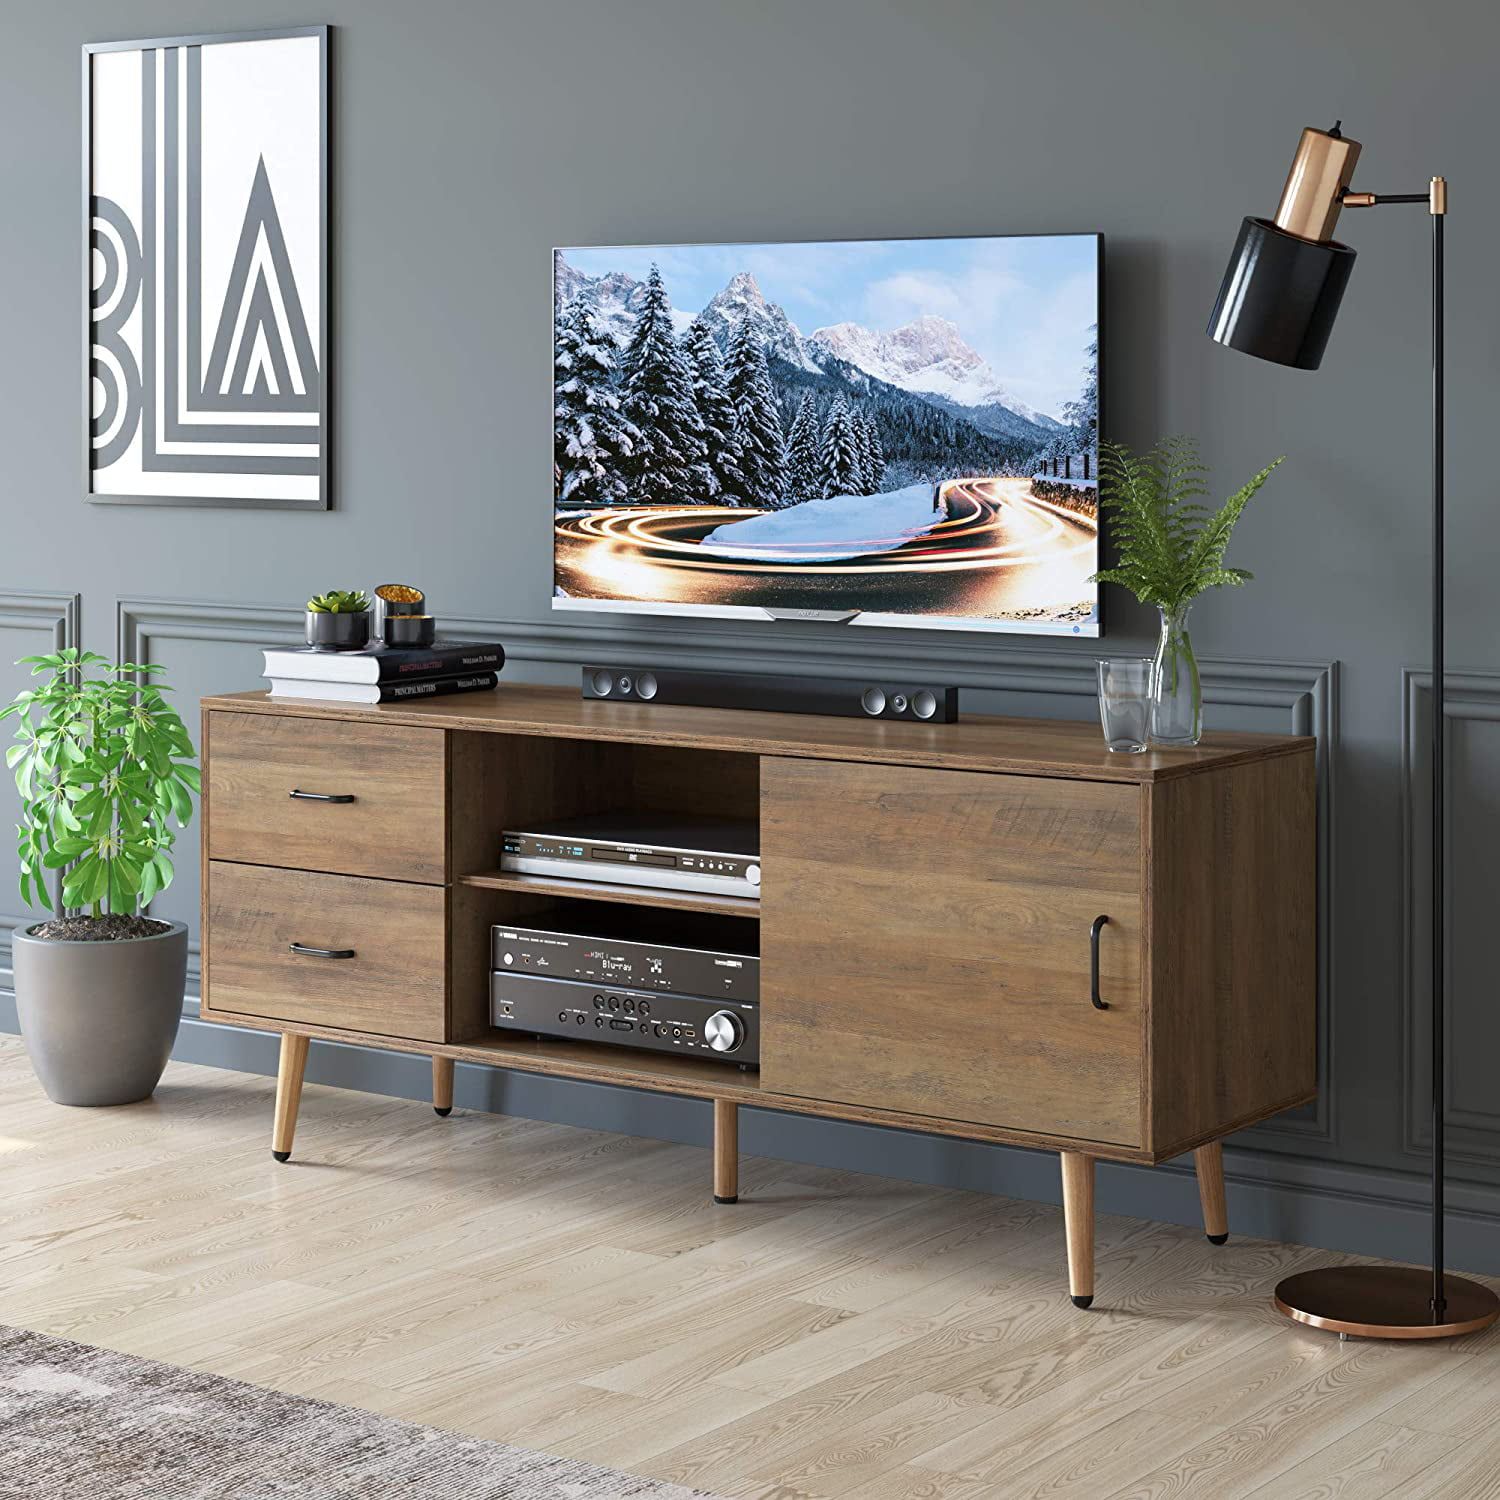 Homfa Tv Cabinet Media Console Table, Wood Tv Stand For Tvs Up To 60 Inside Tv Stands With 2 Doors And 2 Open Shelves (View 2 of 20)